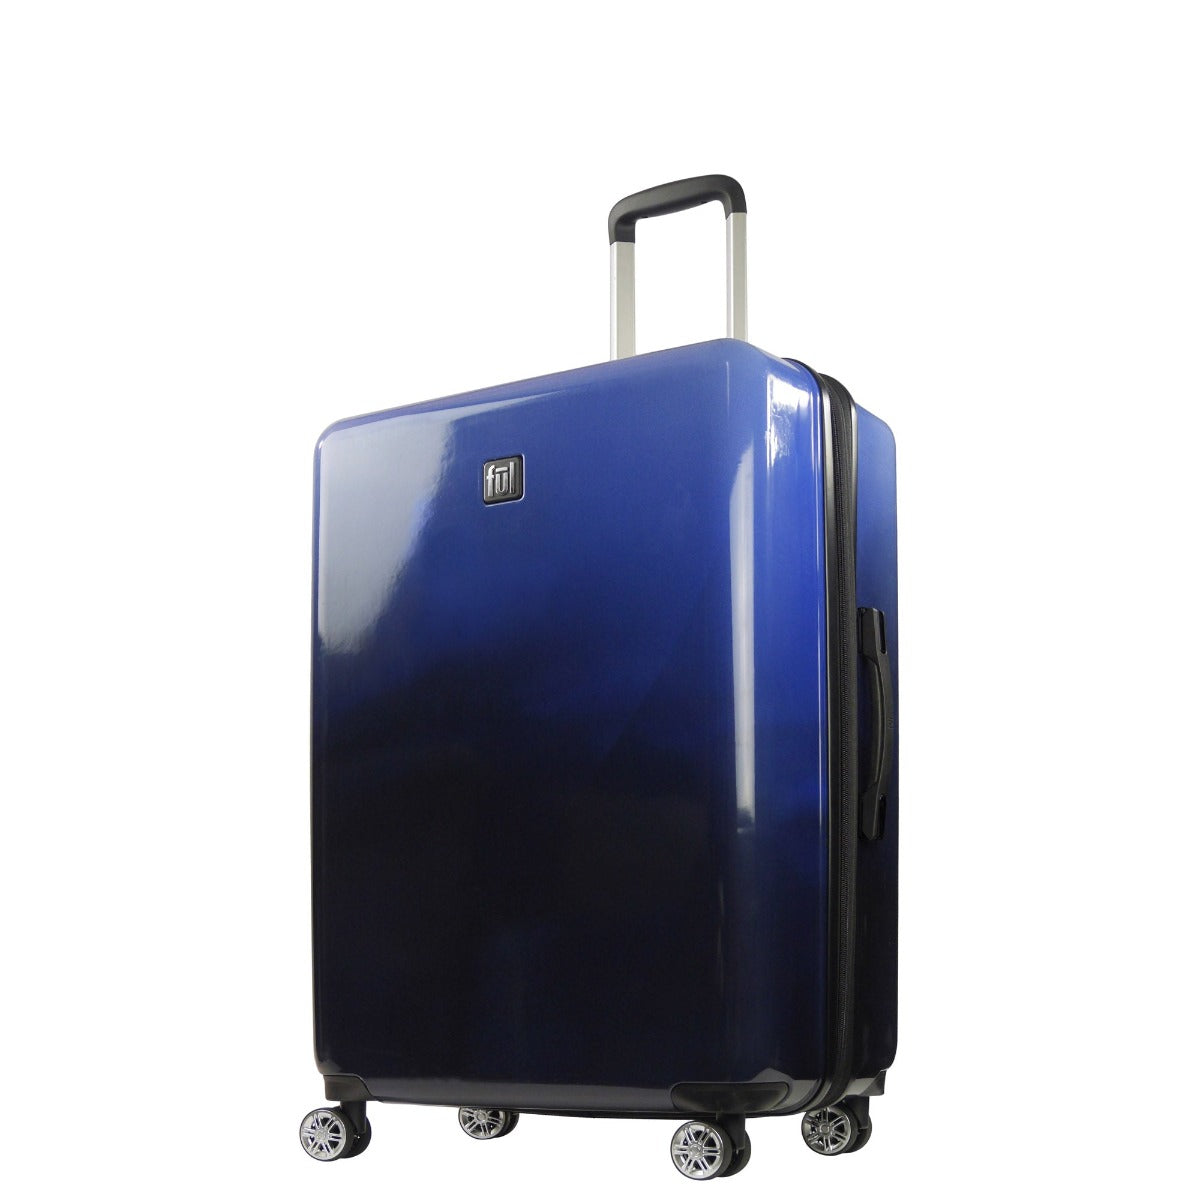 Blue Ful Impulse Ombre 31" check-in hardside spinner suitcase rolling luggage